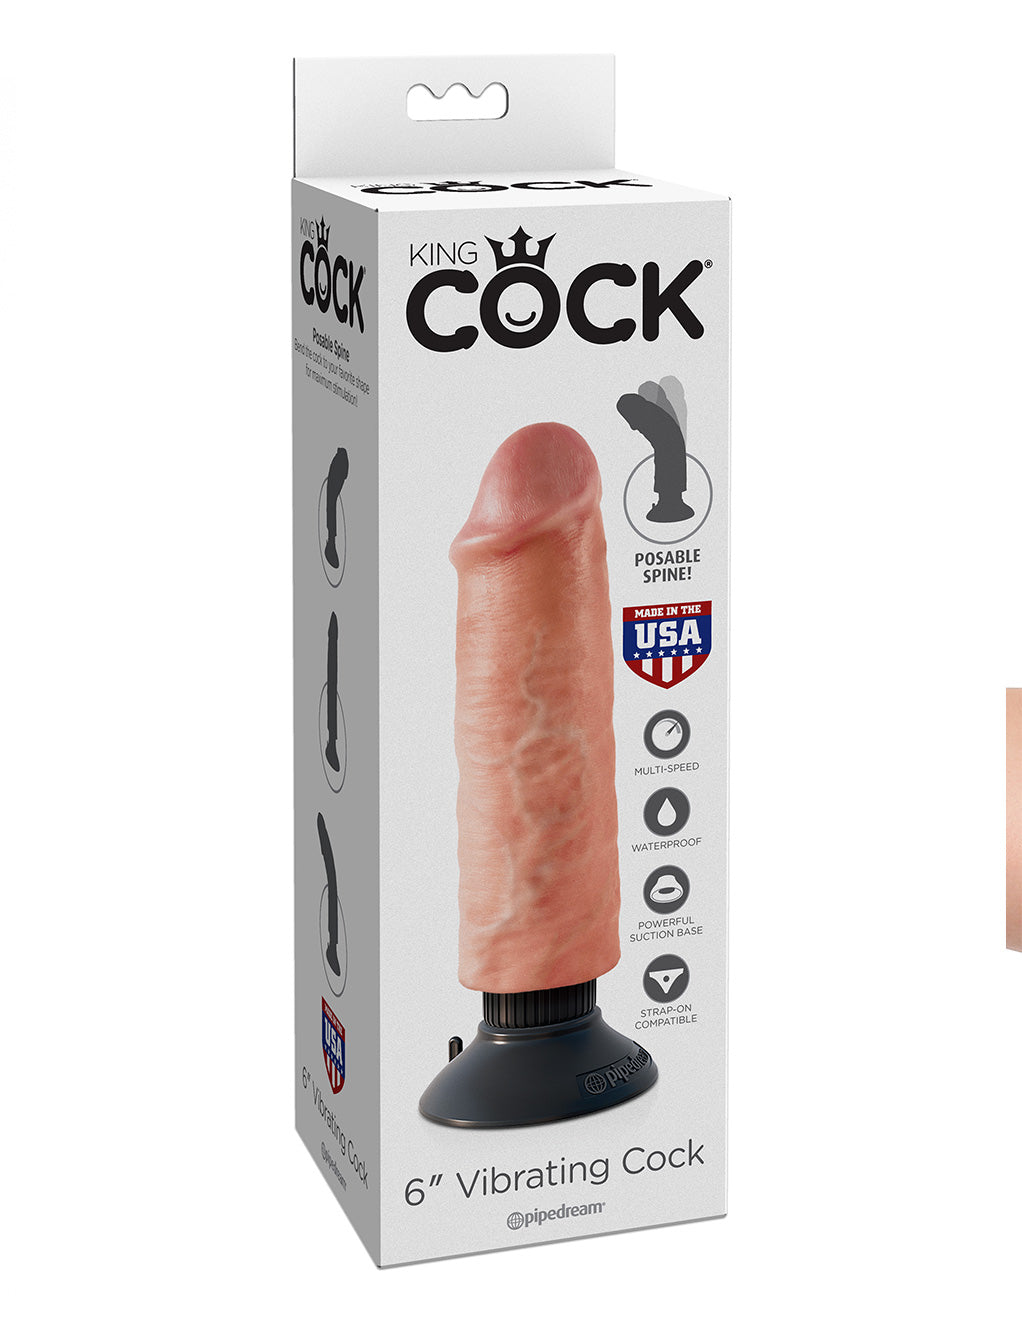 Pipedream King Cock 6 Inch Vibrating Cock